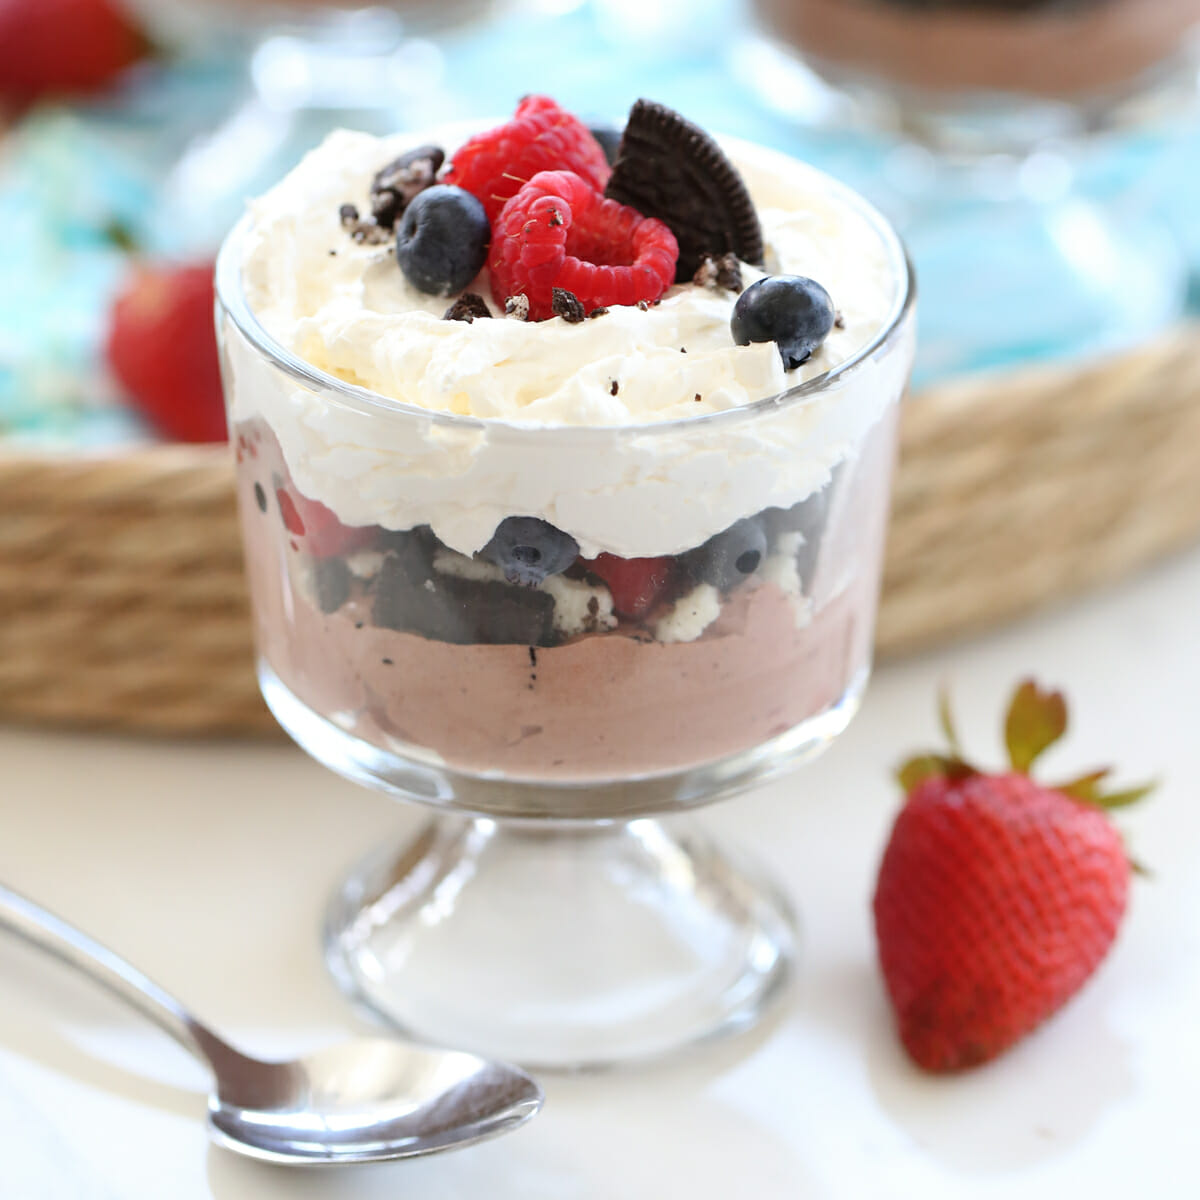 layered cream, berries and chocolate Pudding in bowl